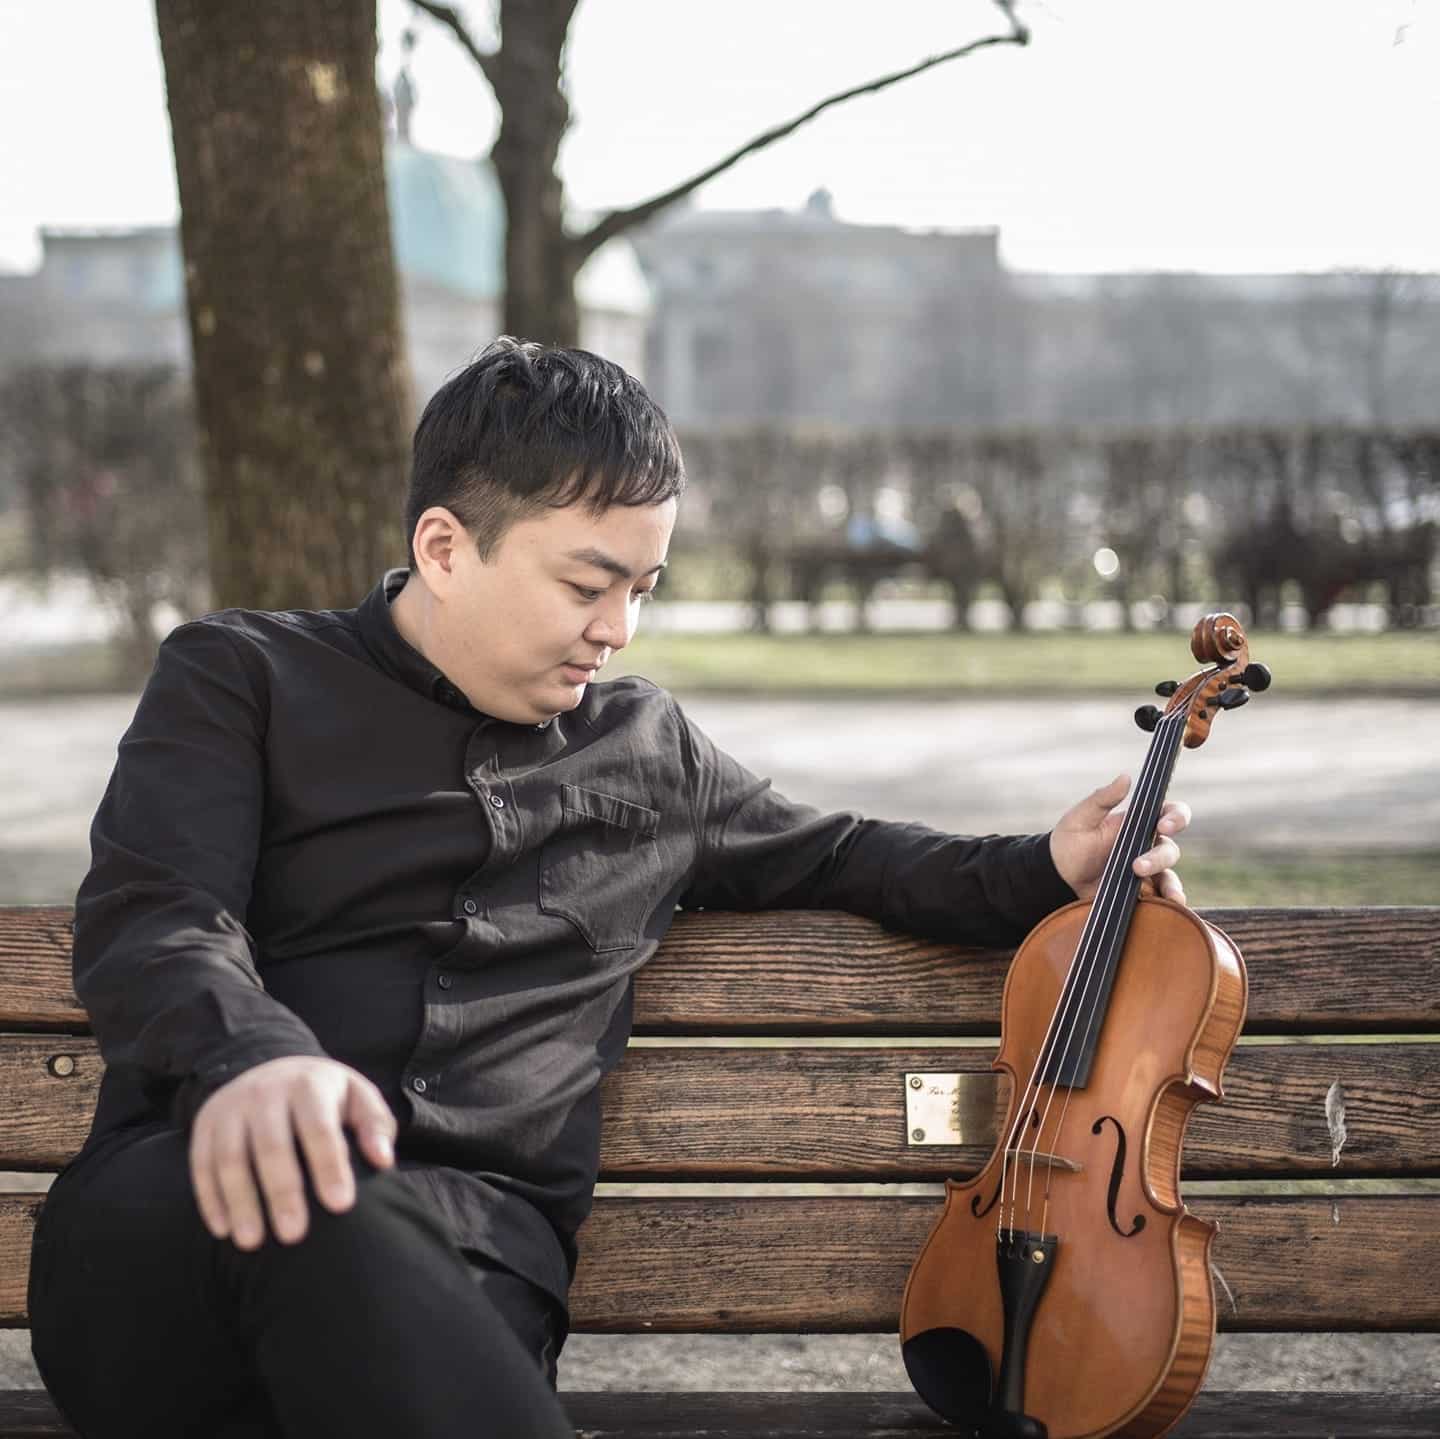 Just in: Berlin Philharmonic confirms its first Chinese player